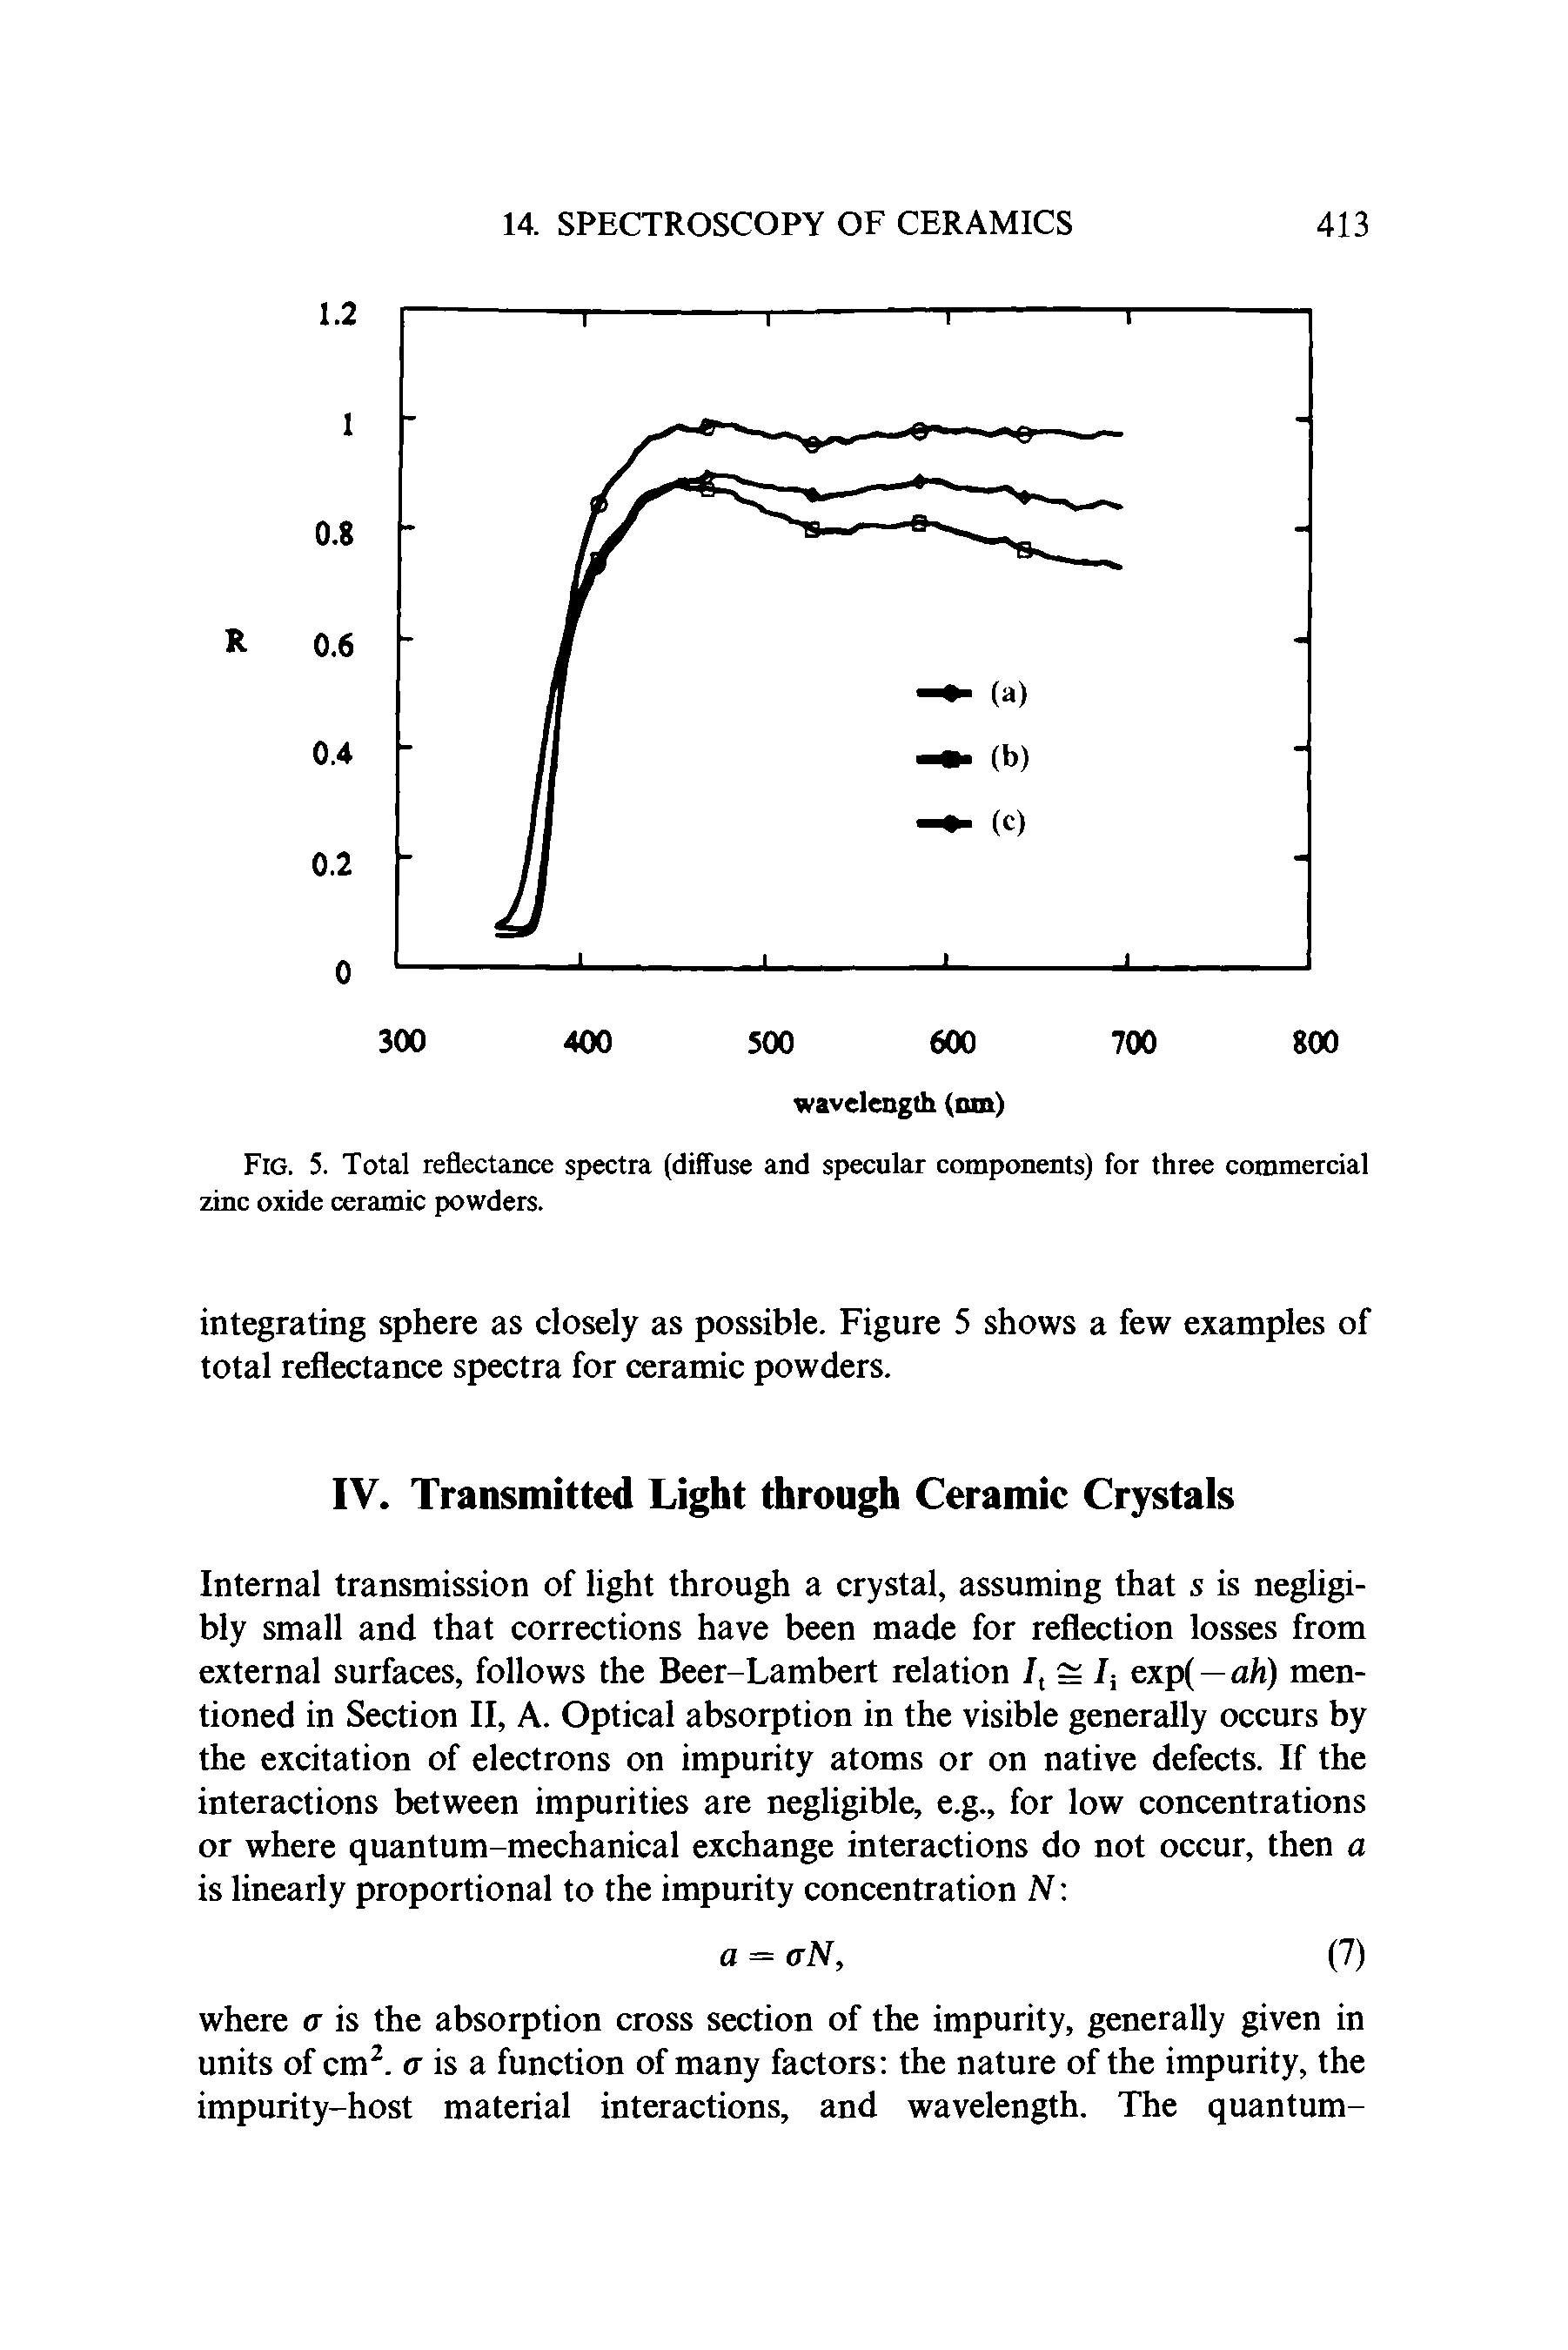 Fig. 5. Total reflectance spectra (diffuse and specular components) for three commercial zinc oxide ceramic powders.